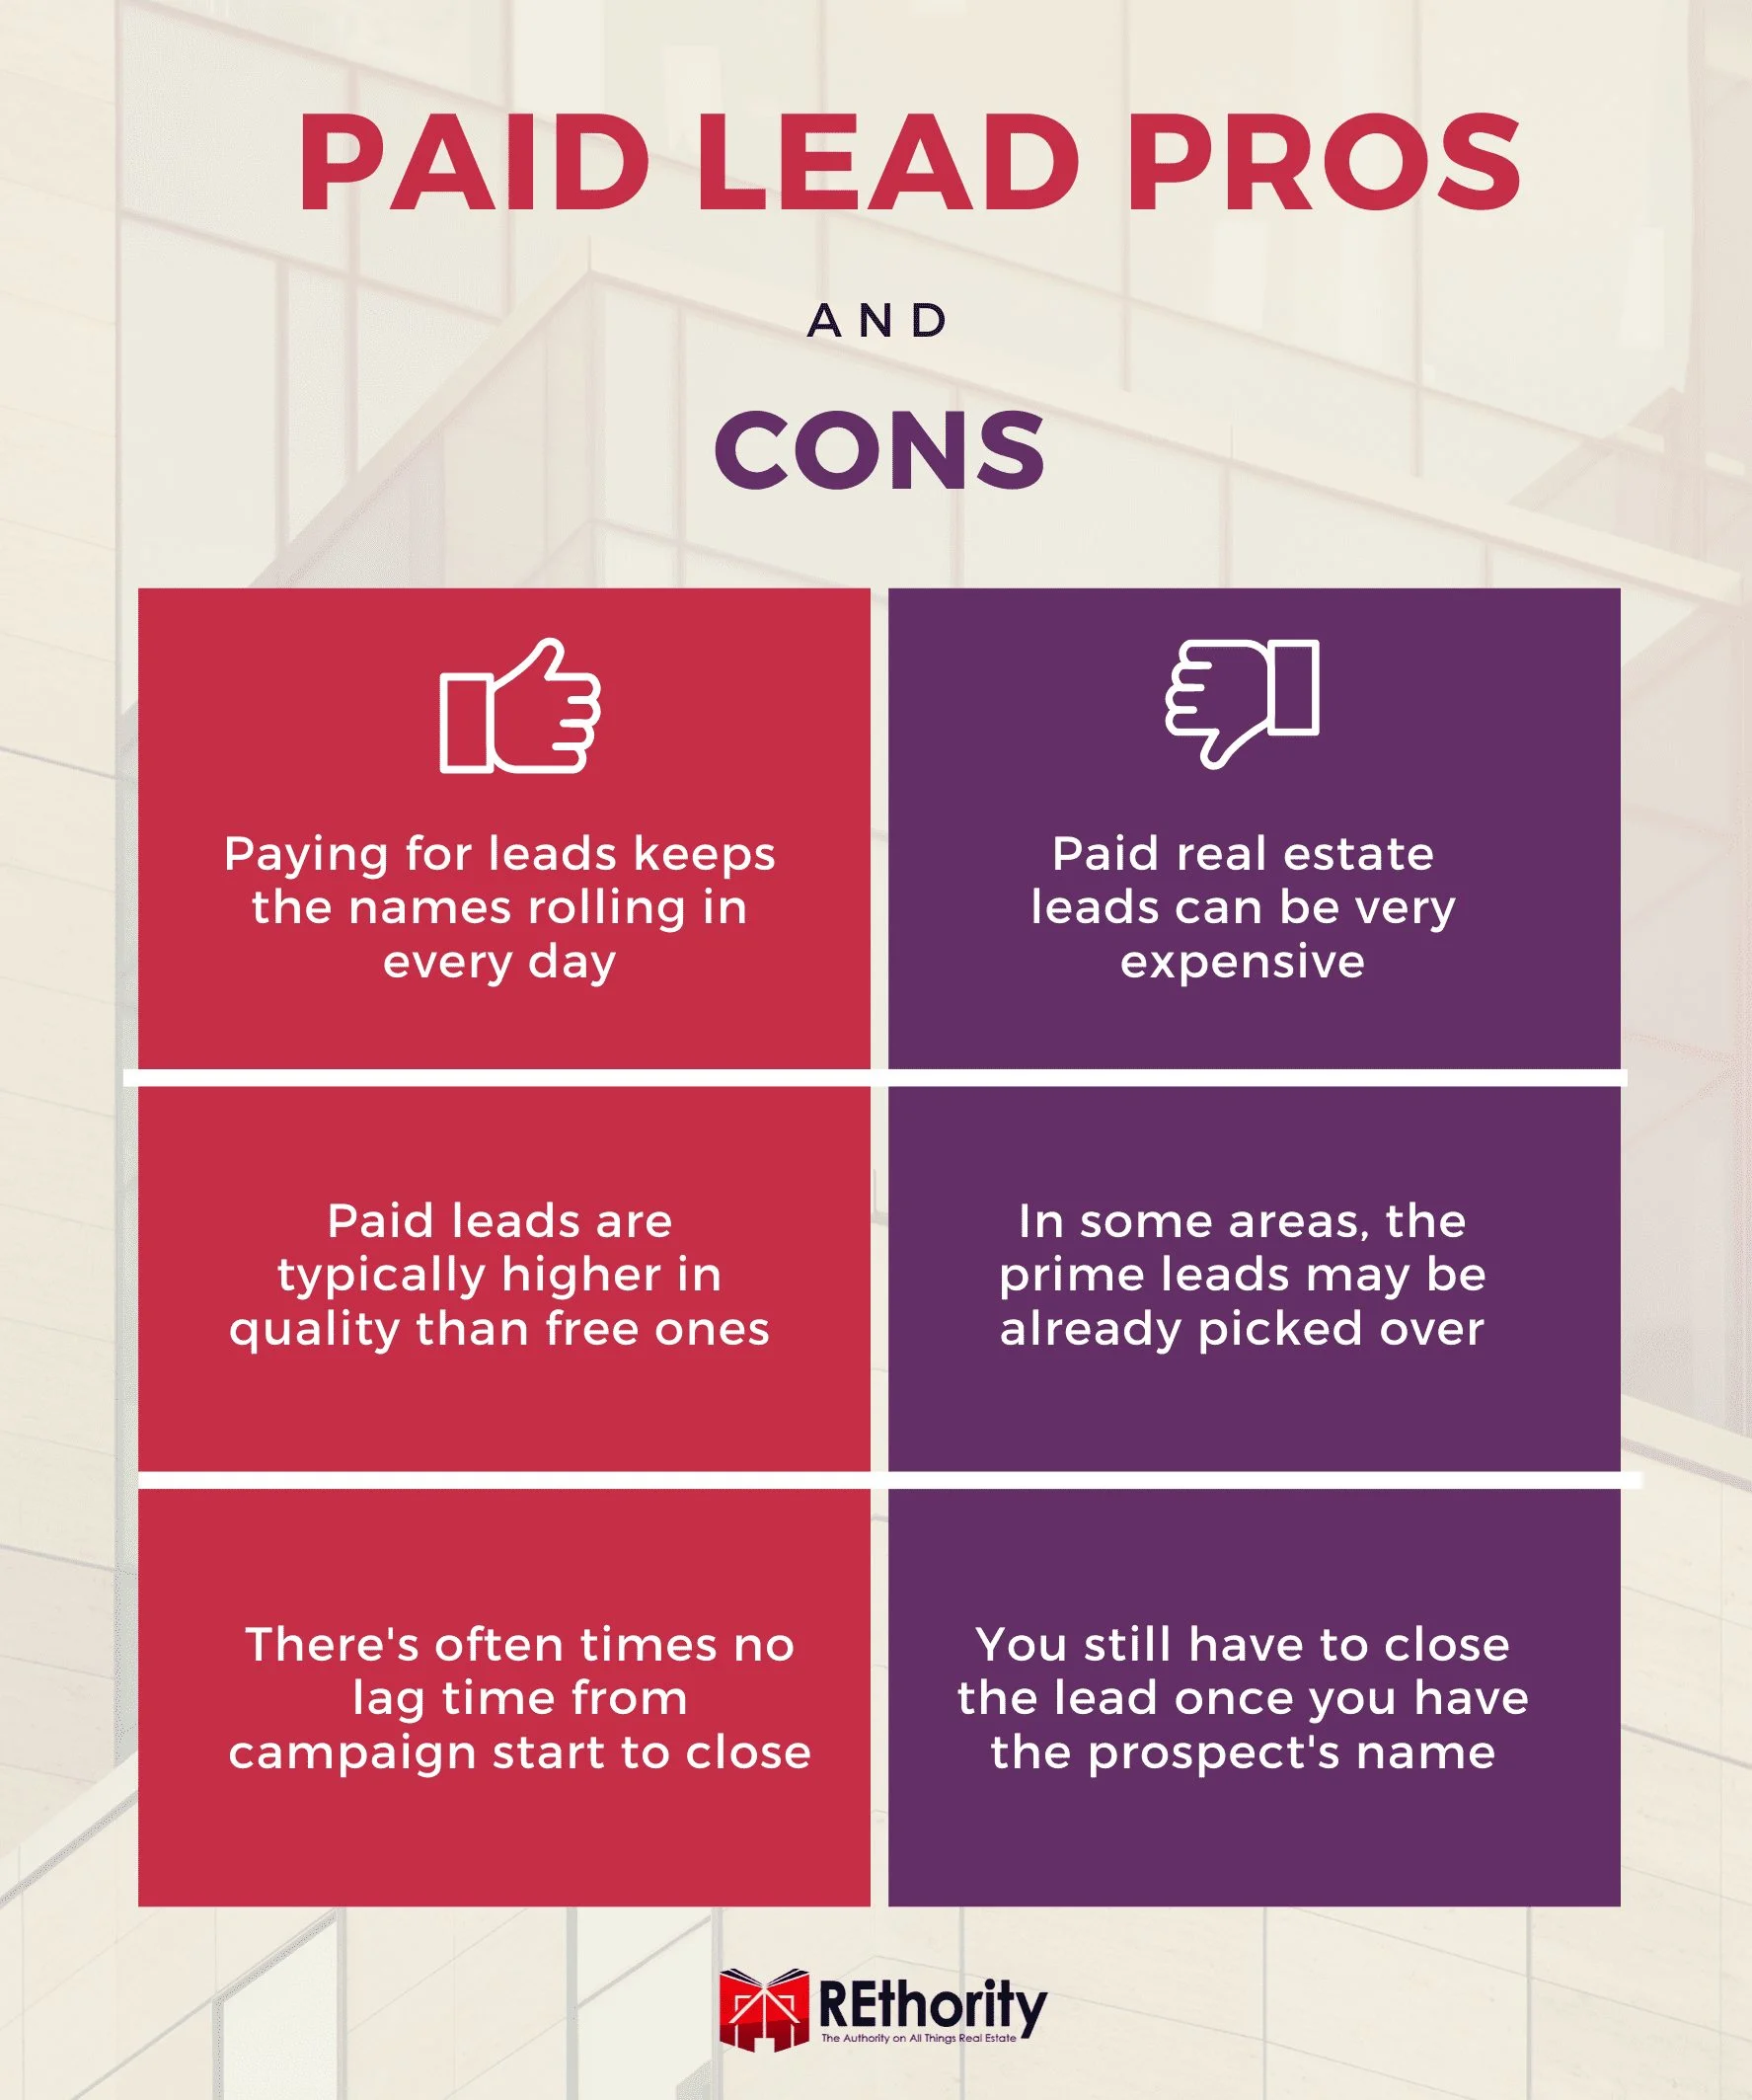 Paid real estate lead pros and cons